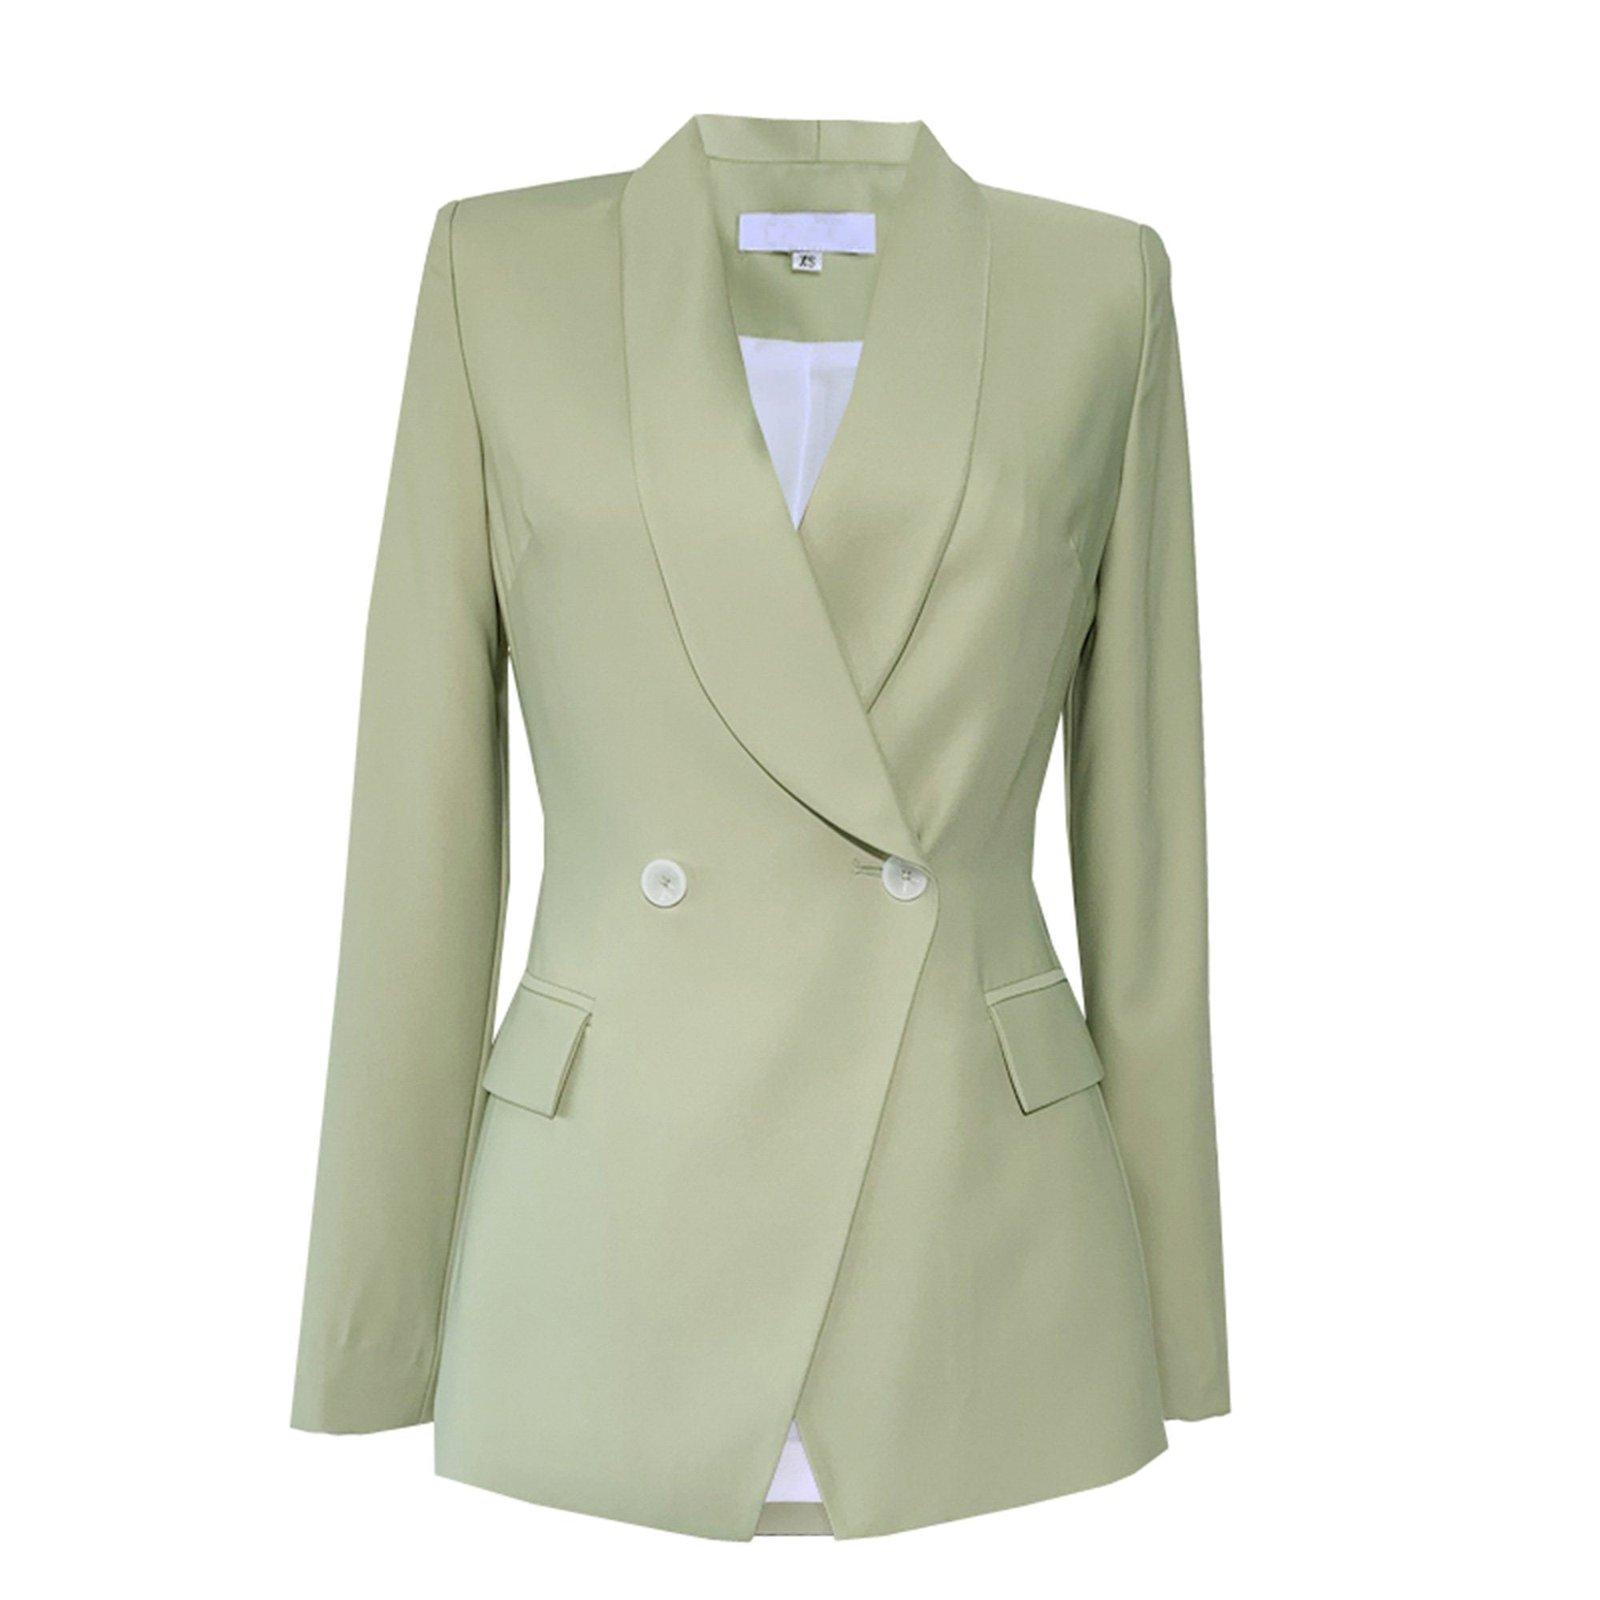 Green Blazer Ladies Women Suit Double Breasted Casual Coat Jacket Pants  Veromia Trouser Suit Formal Wedding Guest Wear From Foreverbridal, $73.72